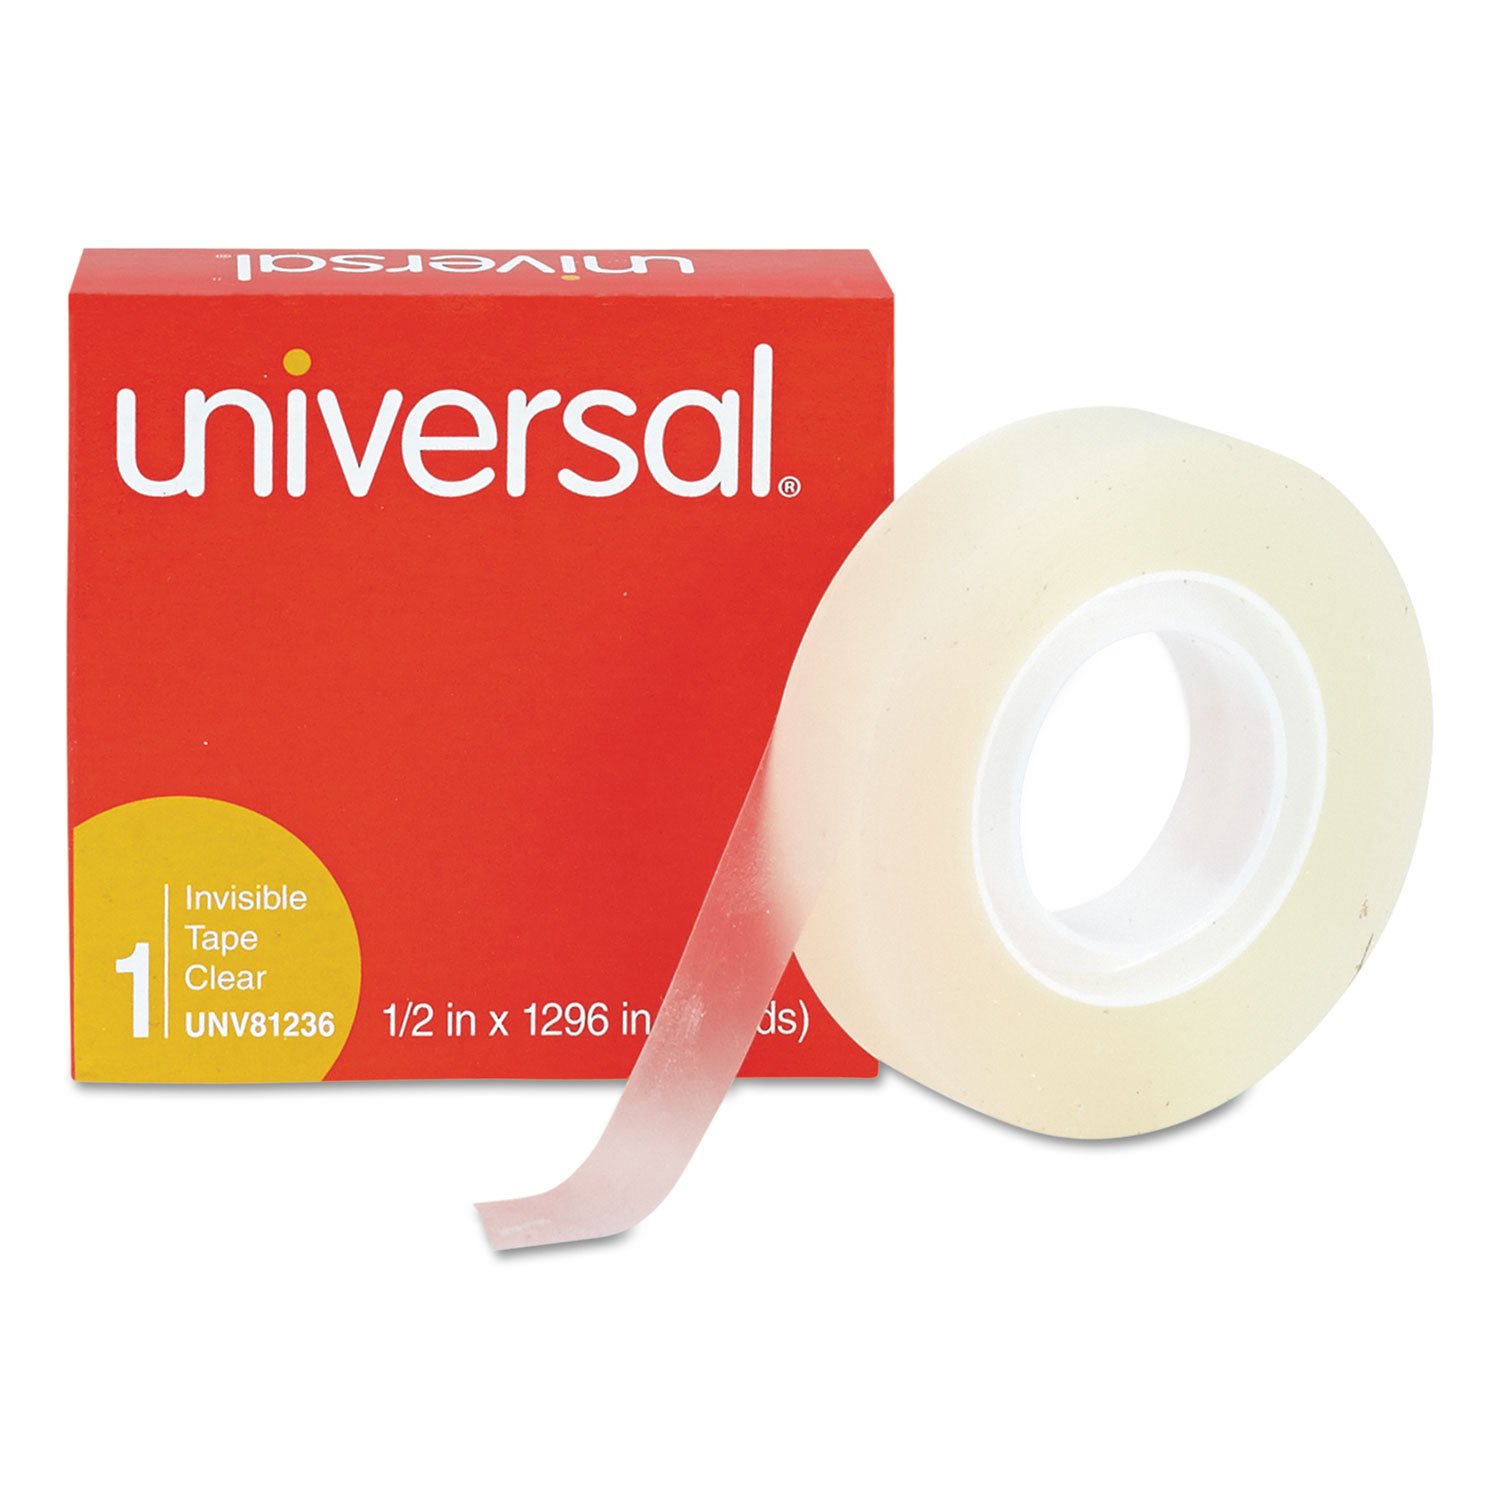  Universal UNV81236 Invisible Tape, 1 Core, 0.5 x 36 yds, Clear (UNV81236) 